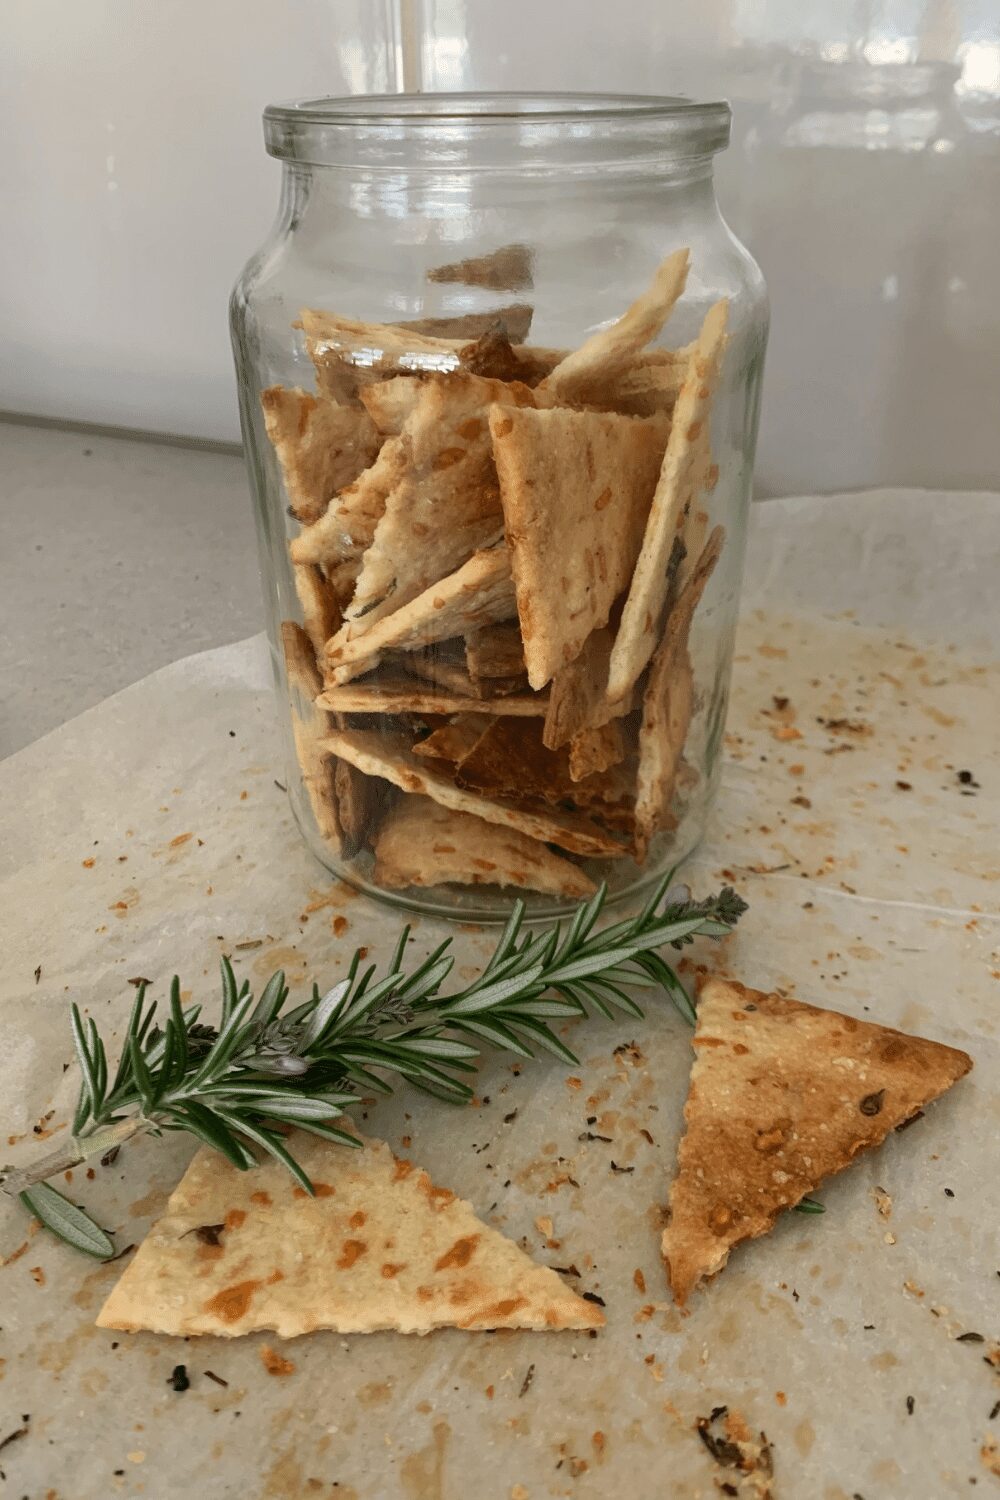 Storing sourdough crackers in glass jars makes wonderful gifts